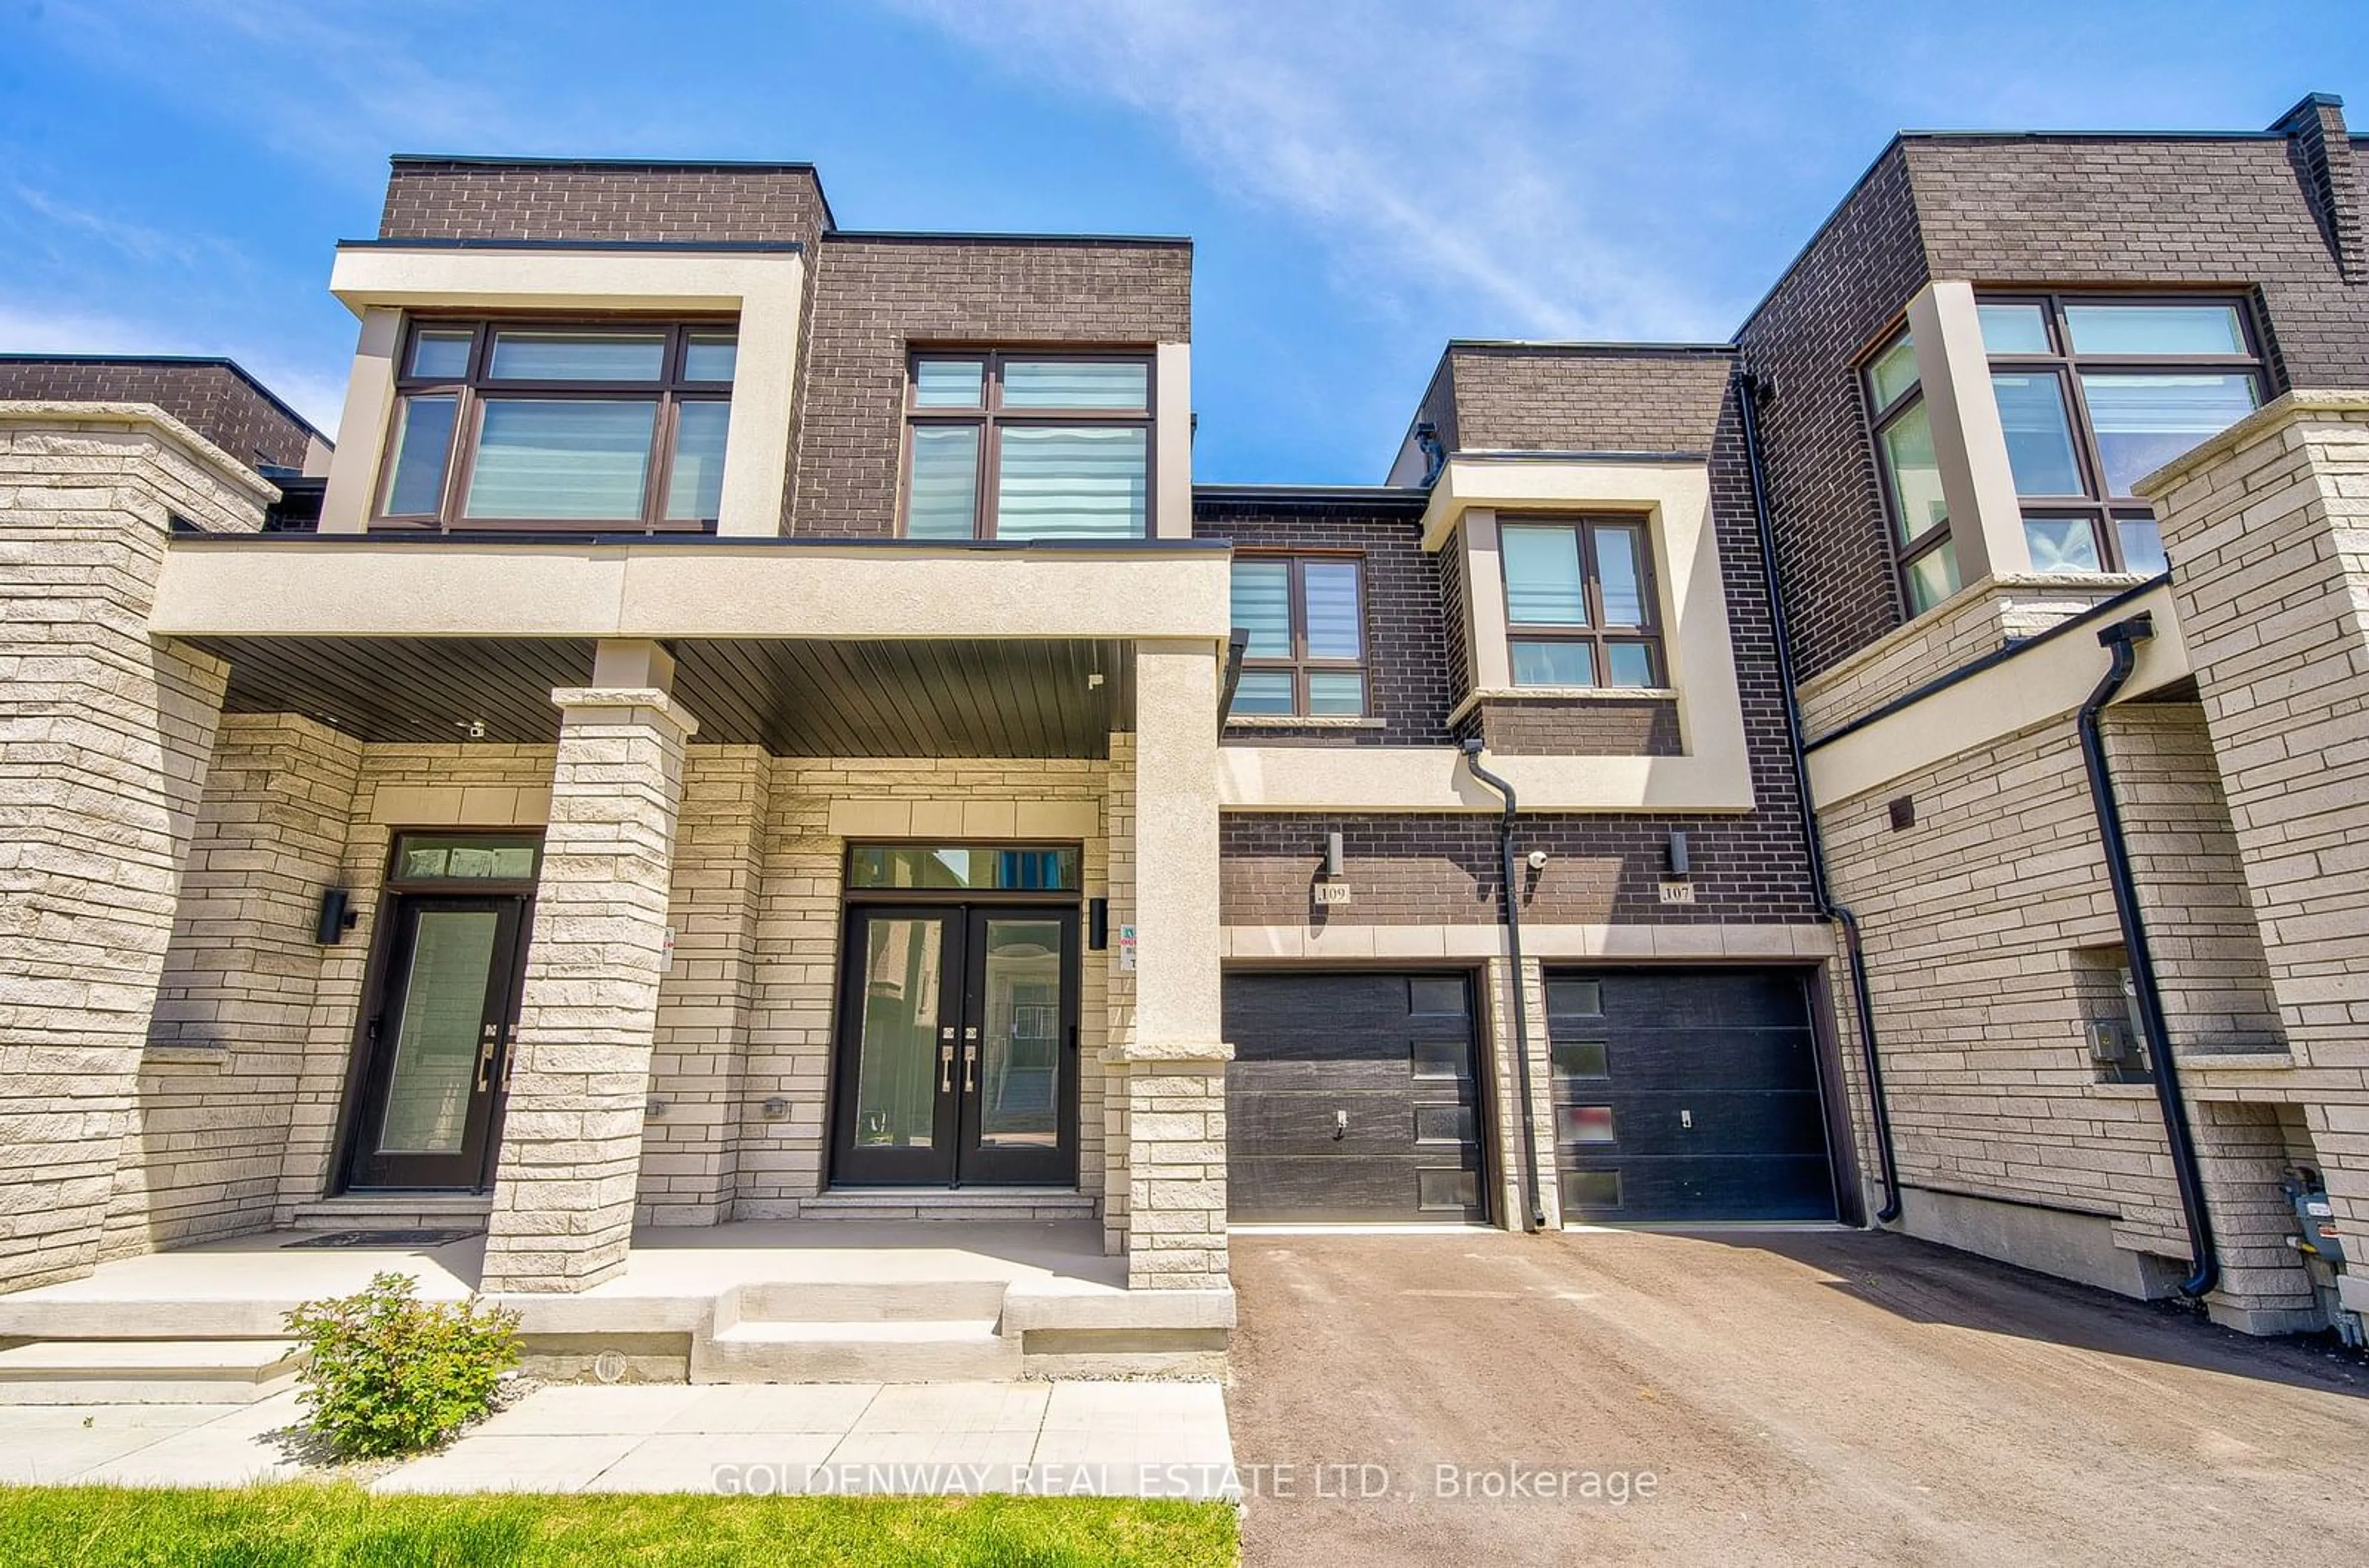 Home with brick exterior material for 109 Hilts Dr, Richmond Hill Ontario L4S 0J2